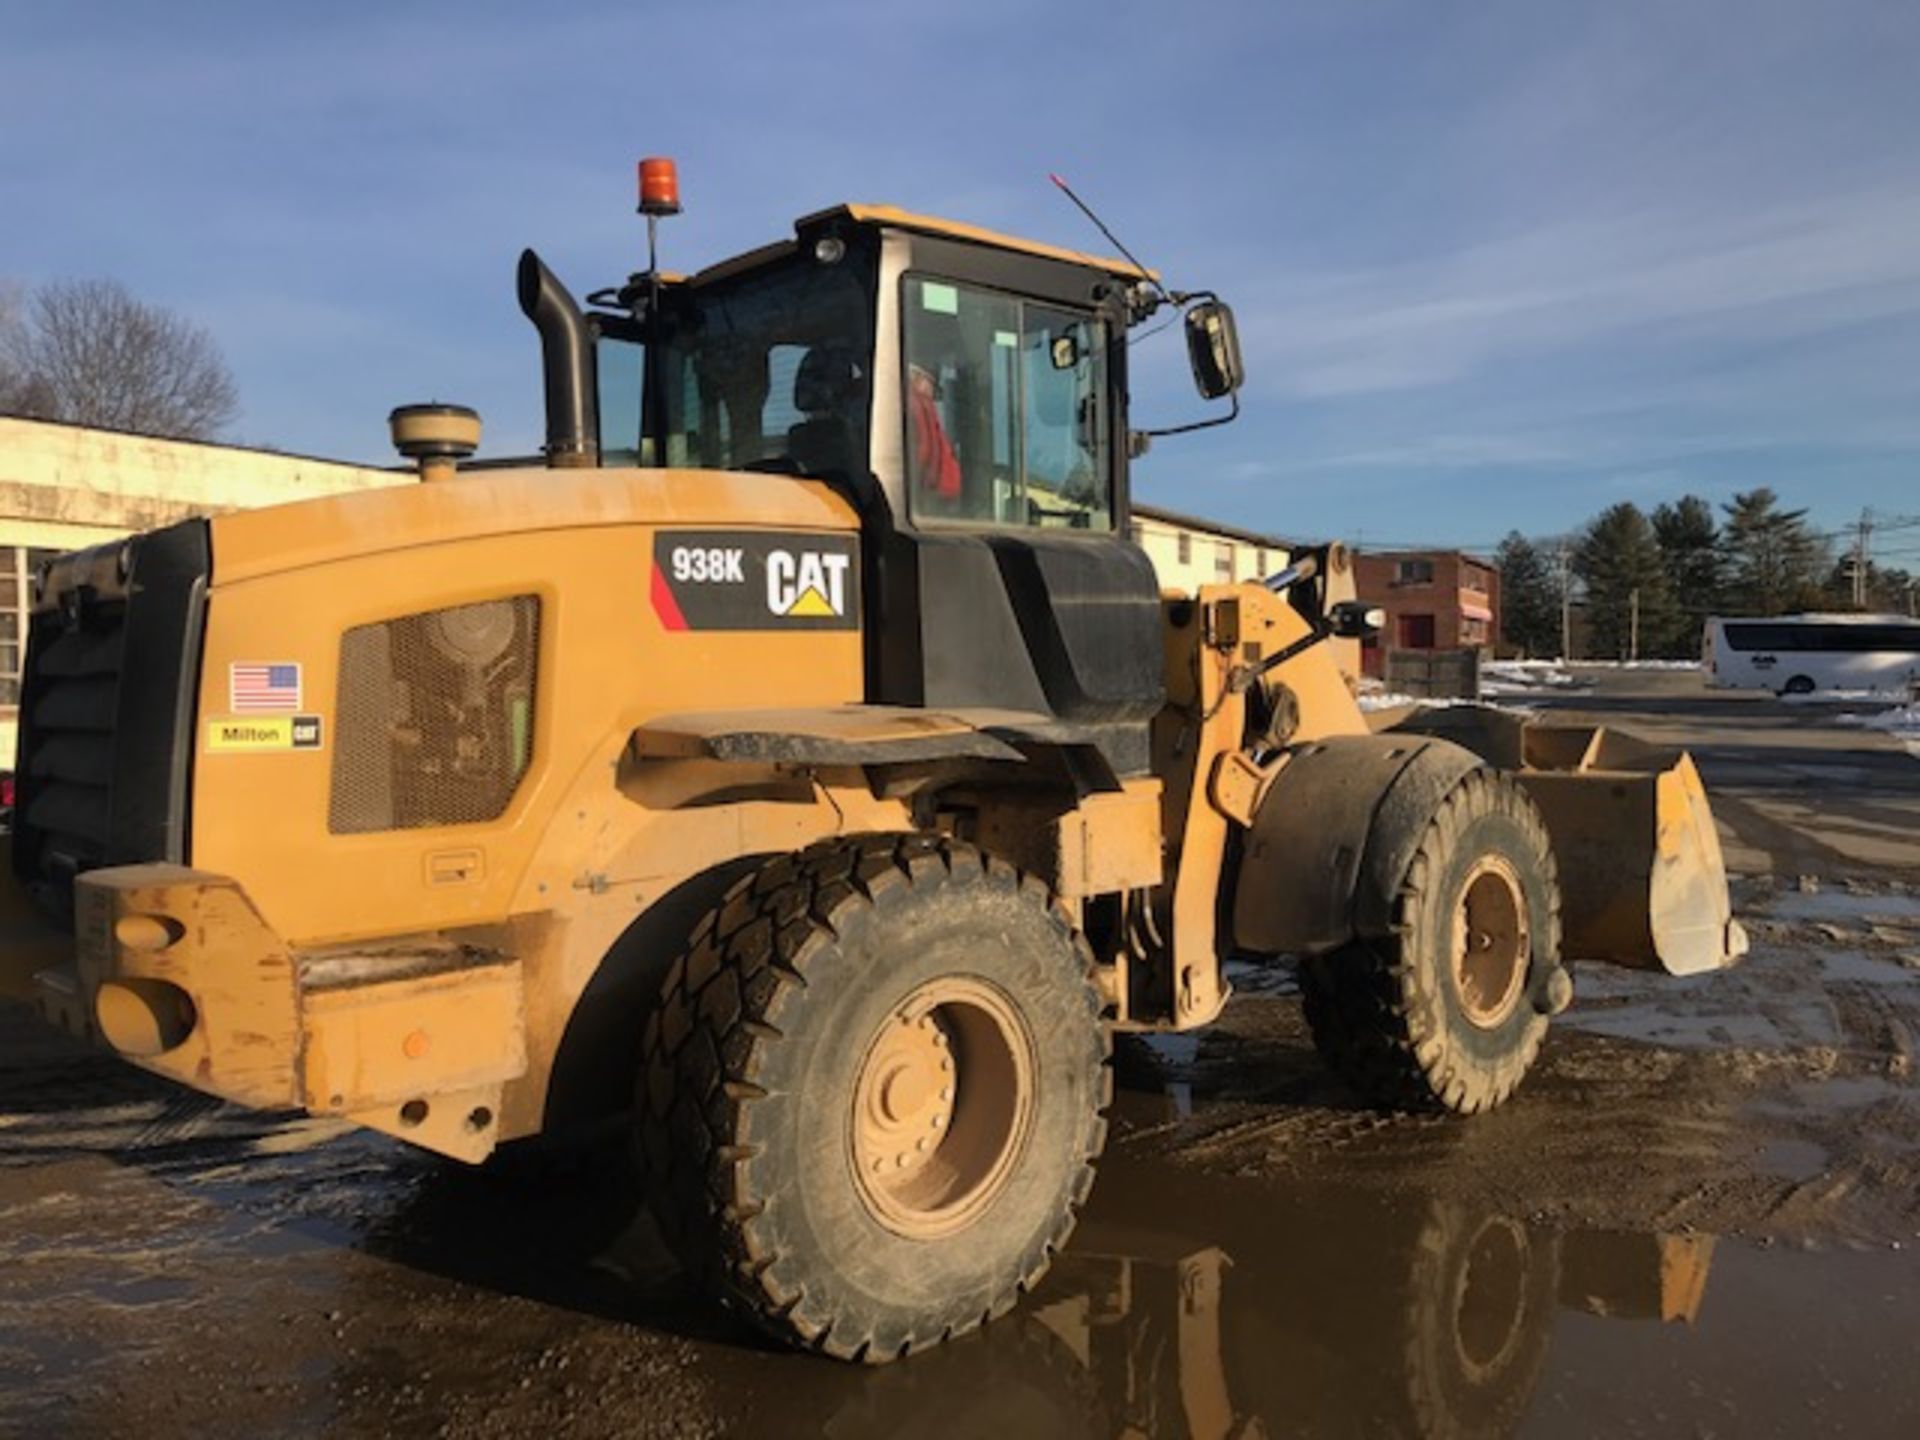 2014 Caterpillar 938K Rubber Tire, Articulated Loader with 6 Yard Bucket. Hours: 6,230 - See Desc.